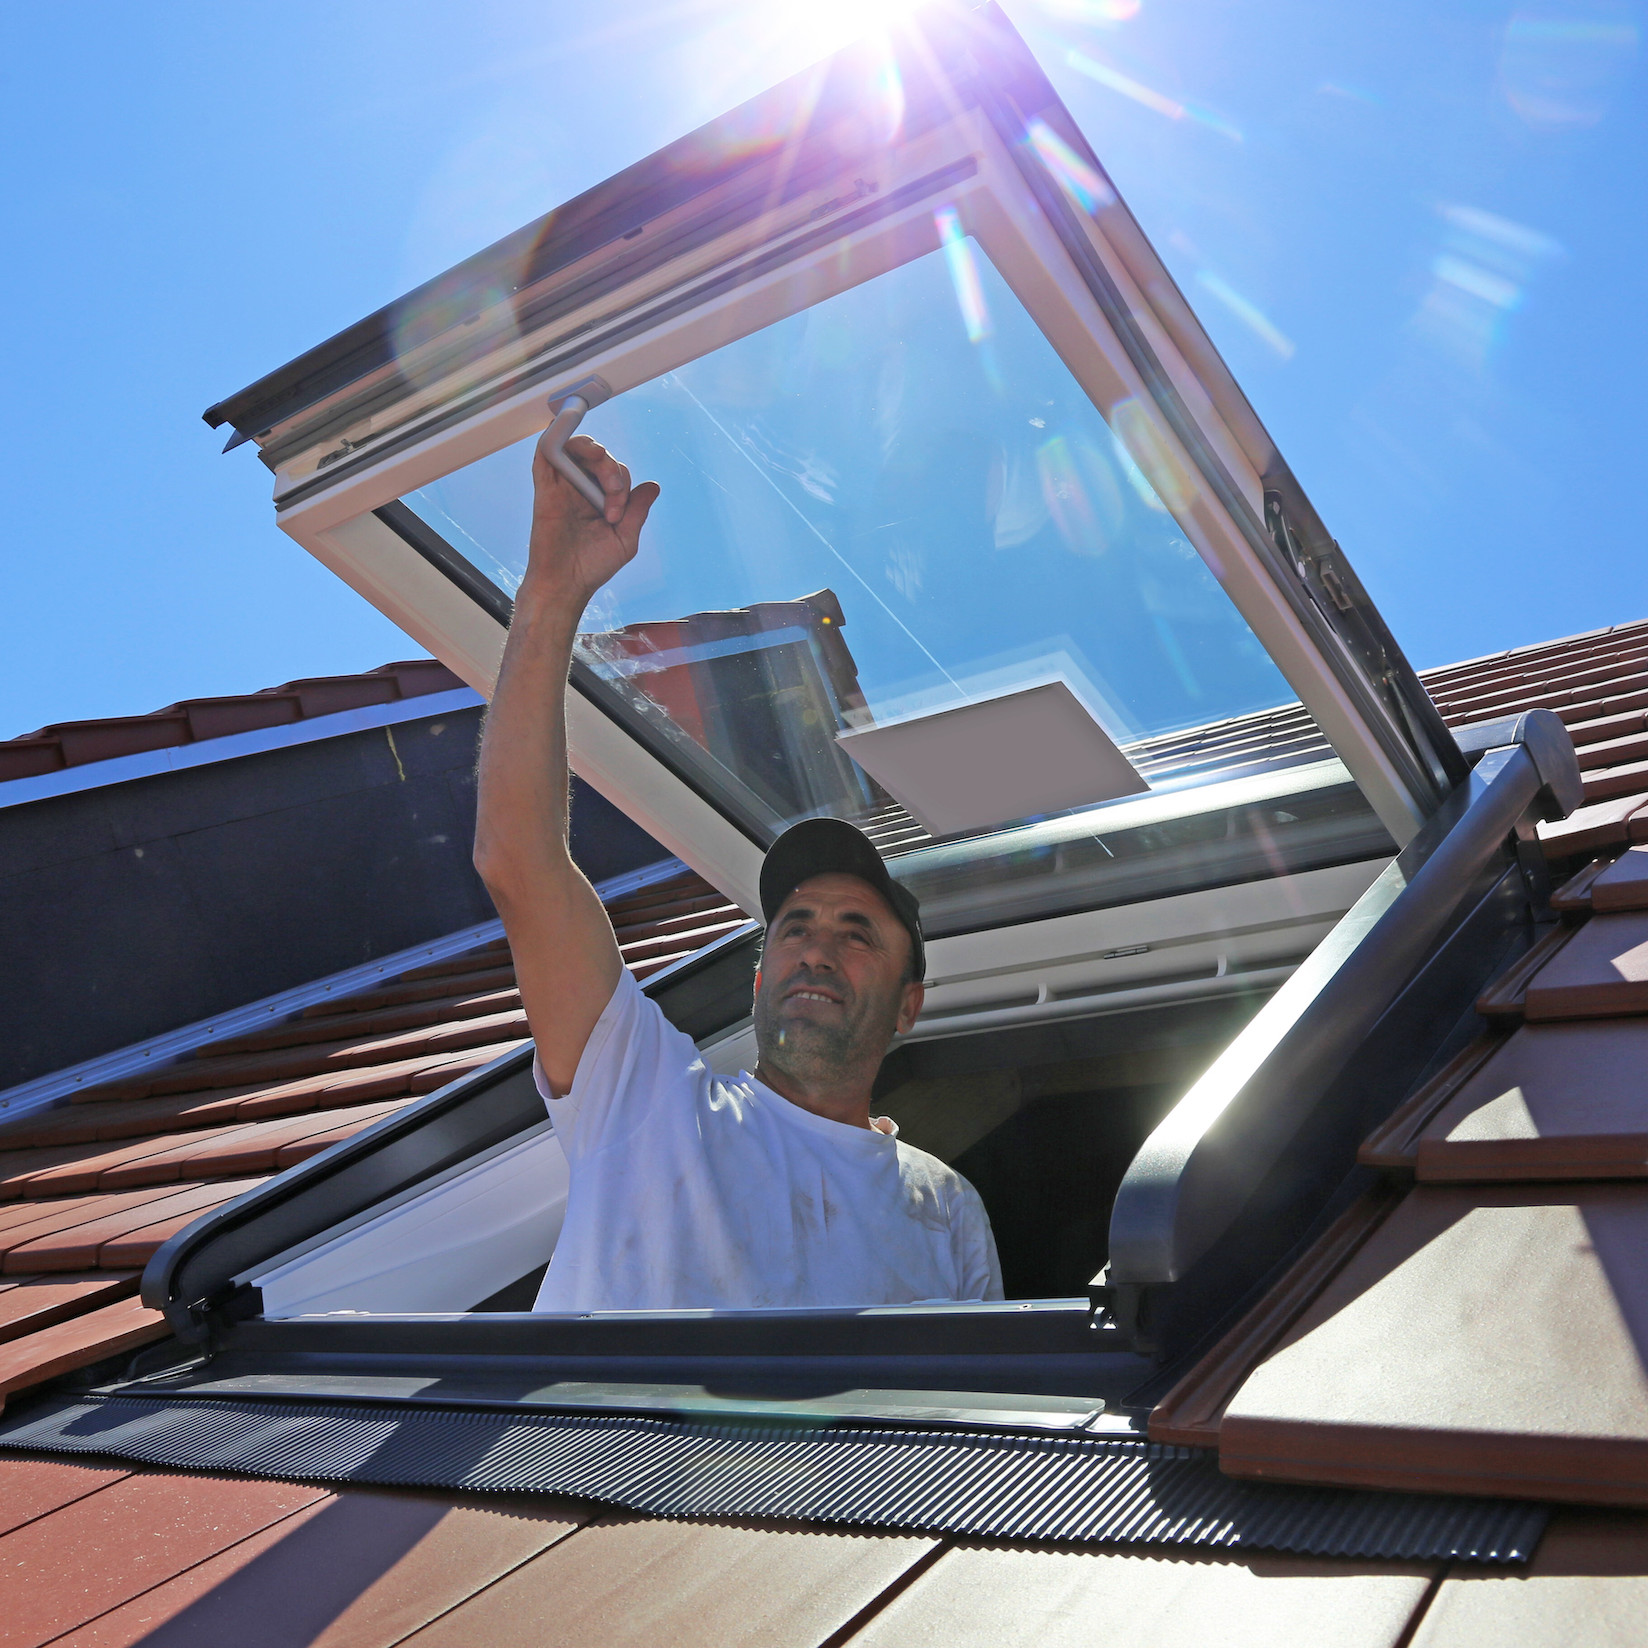 Installation and assembly of new roof windows as part of a roof covering